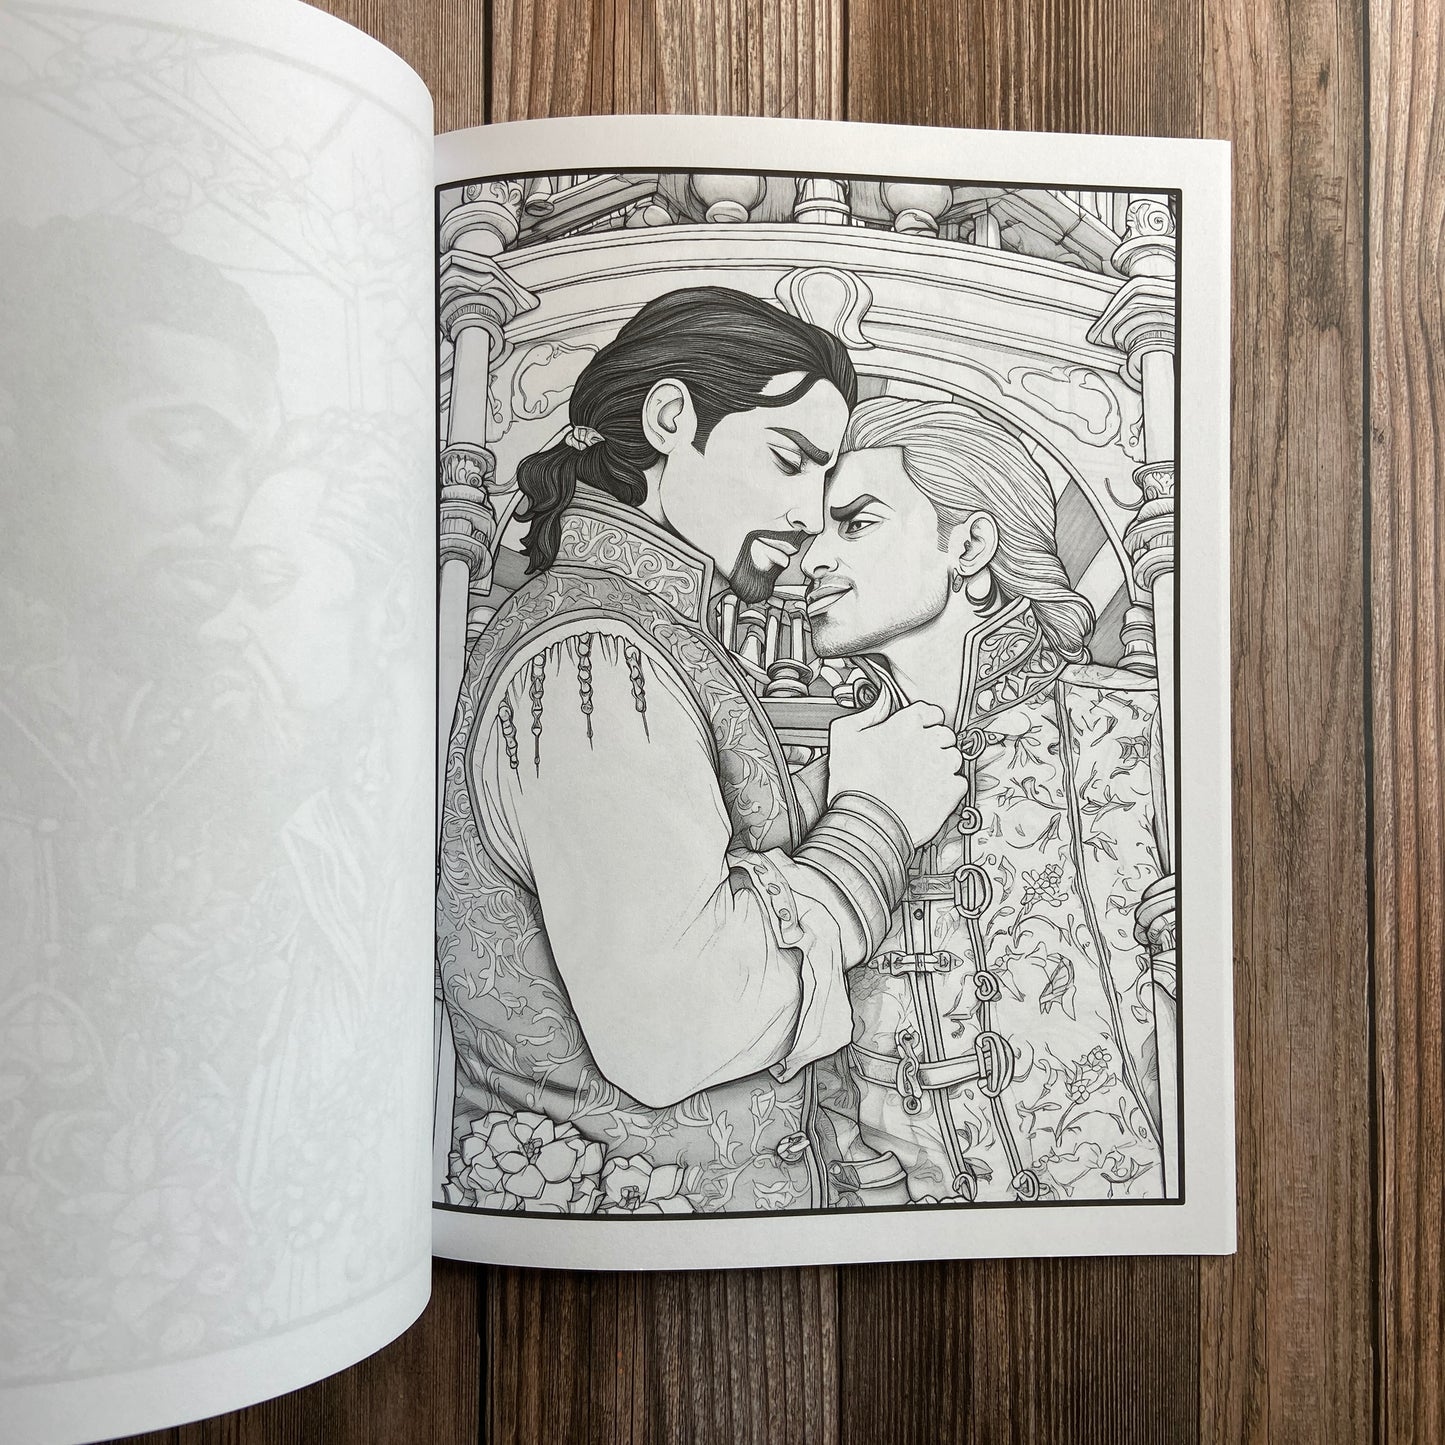 A coloring book featuring an image of two gay pirates kissing is The Gay Pirate Coloring Book by N.C. Starshadow.